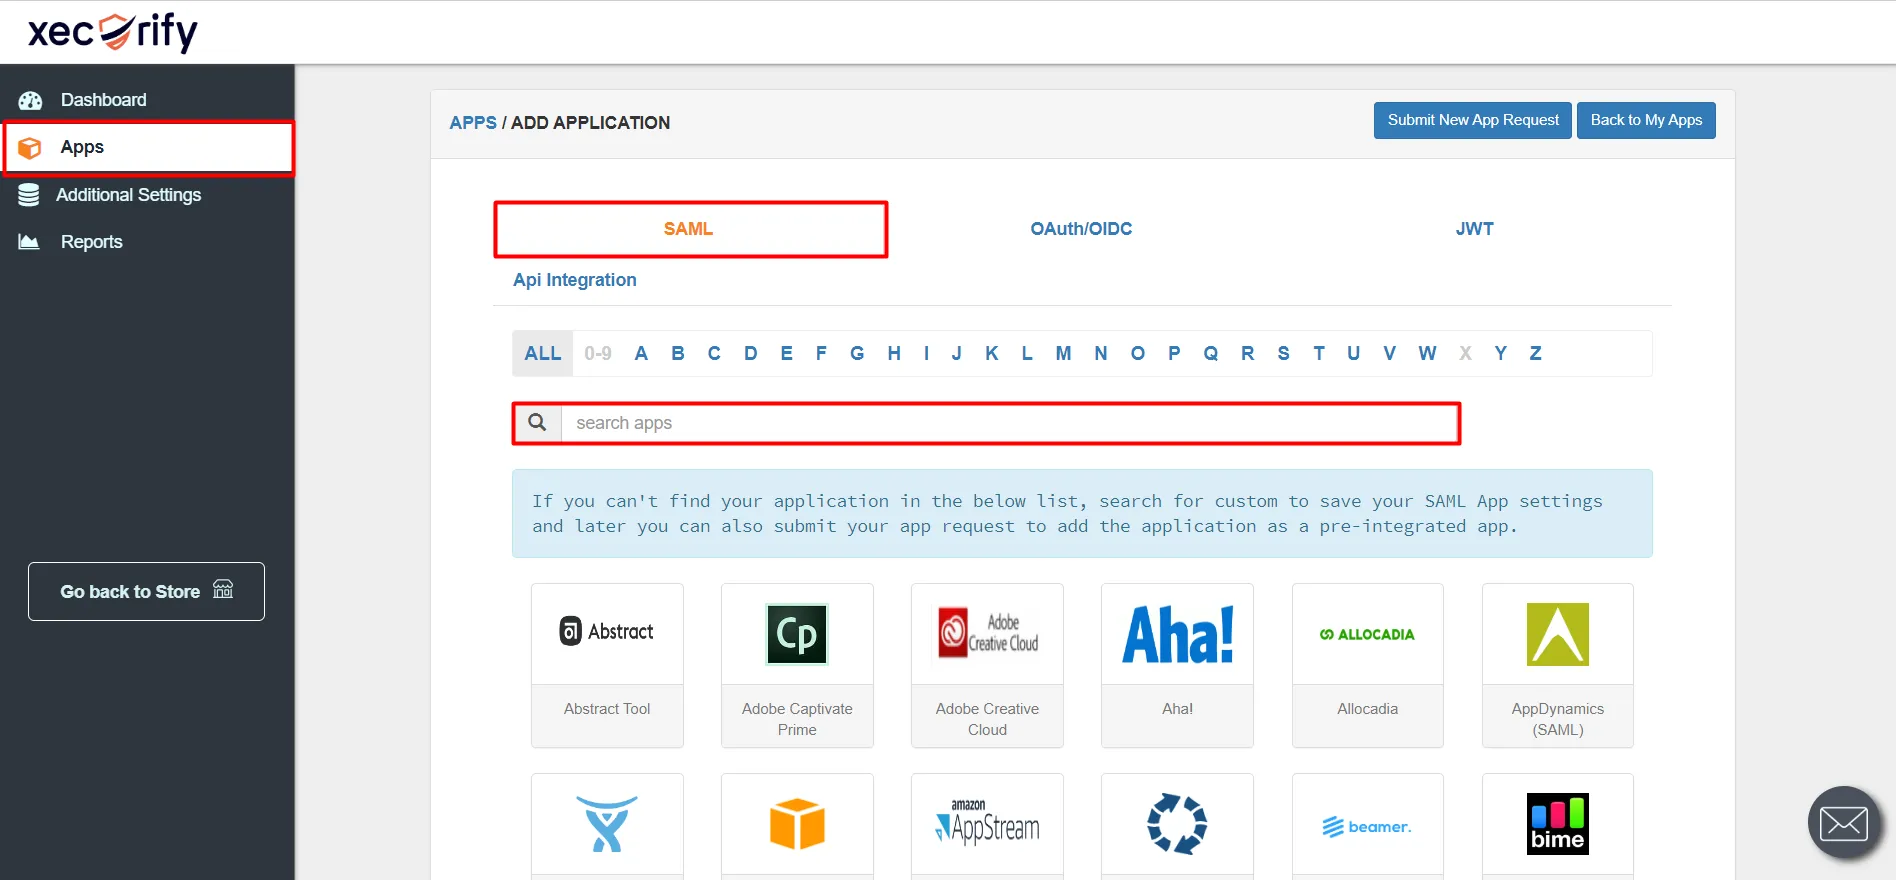 Shopify as IDP - Login using Shopify credentials - search for SAML App